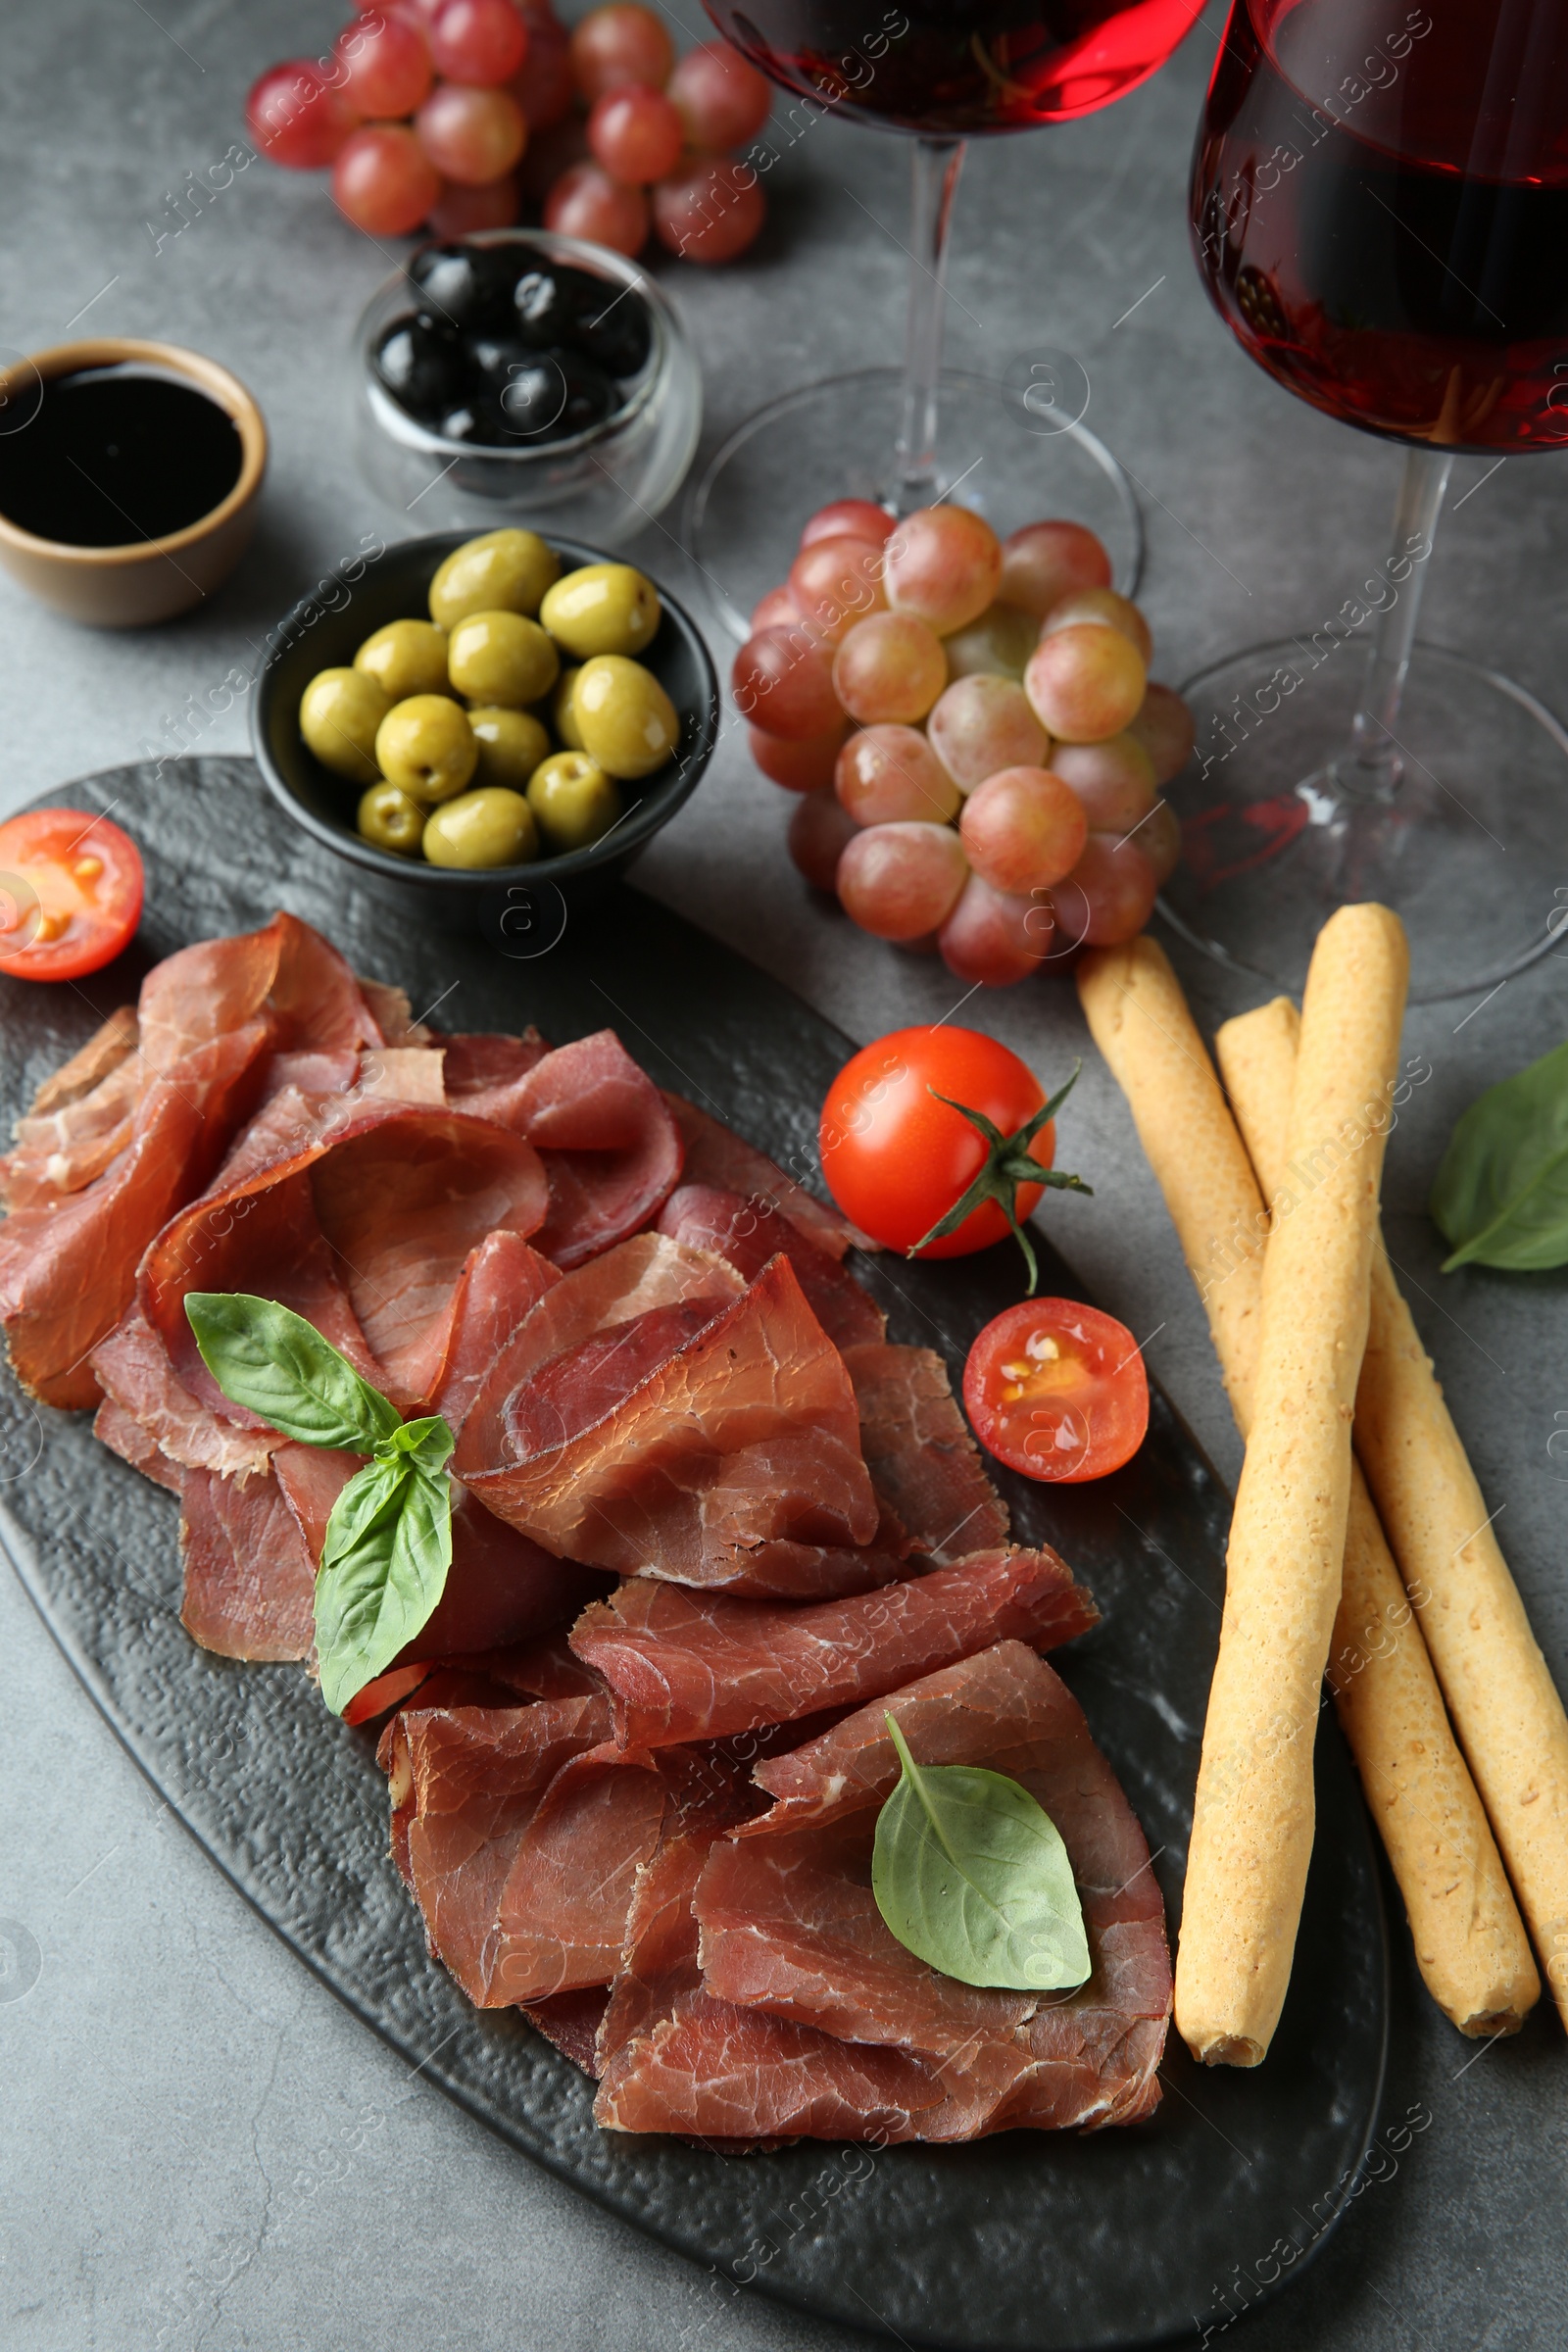 Photo of Delicious bresaola, grissini sticks, olives, tomato and grapes on grey textured table, above view